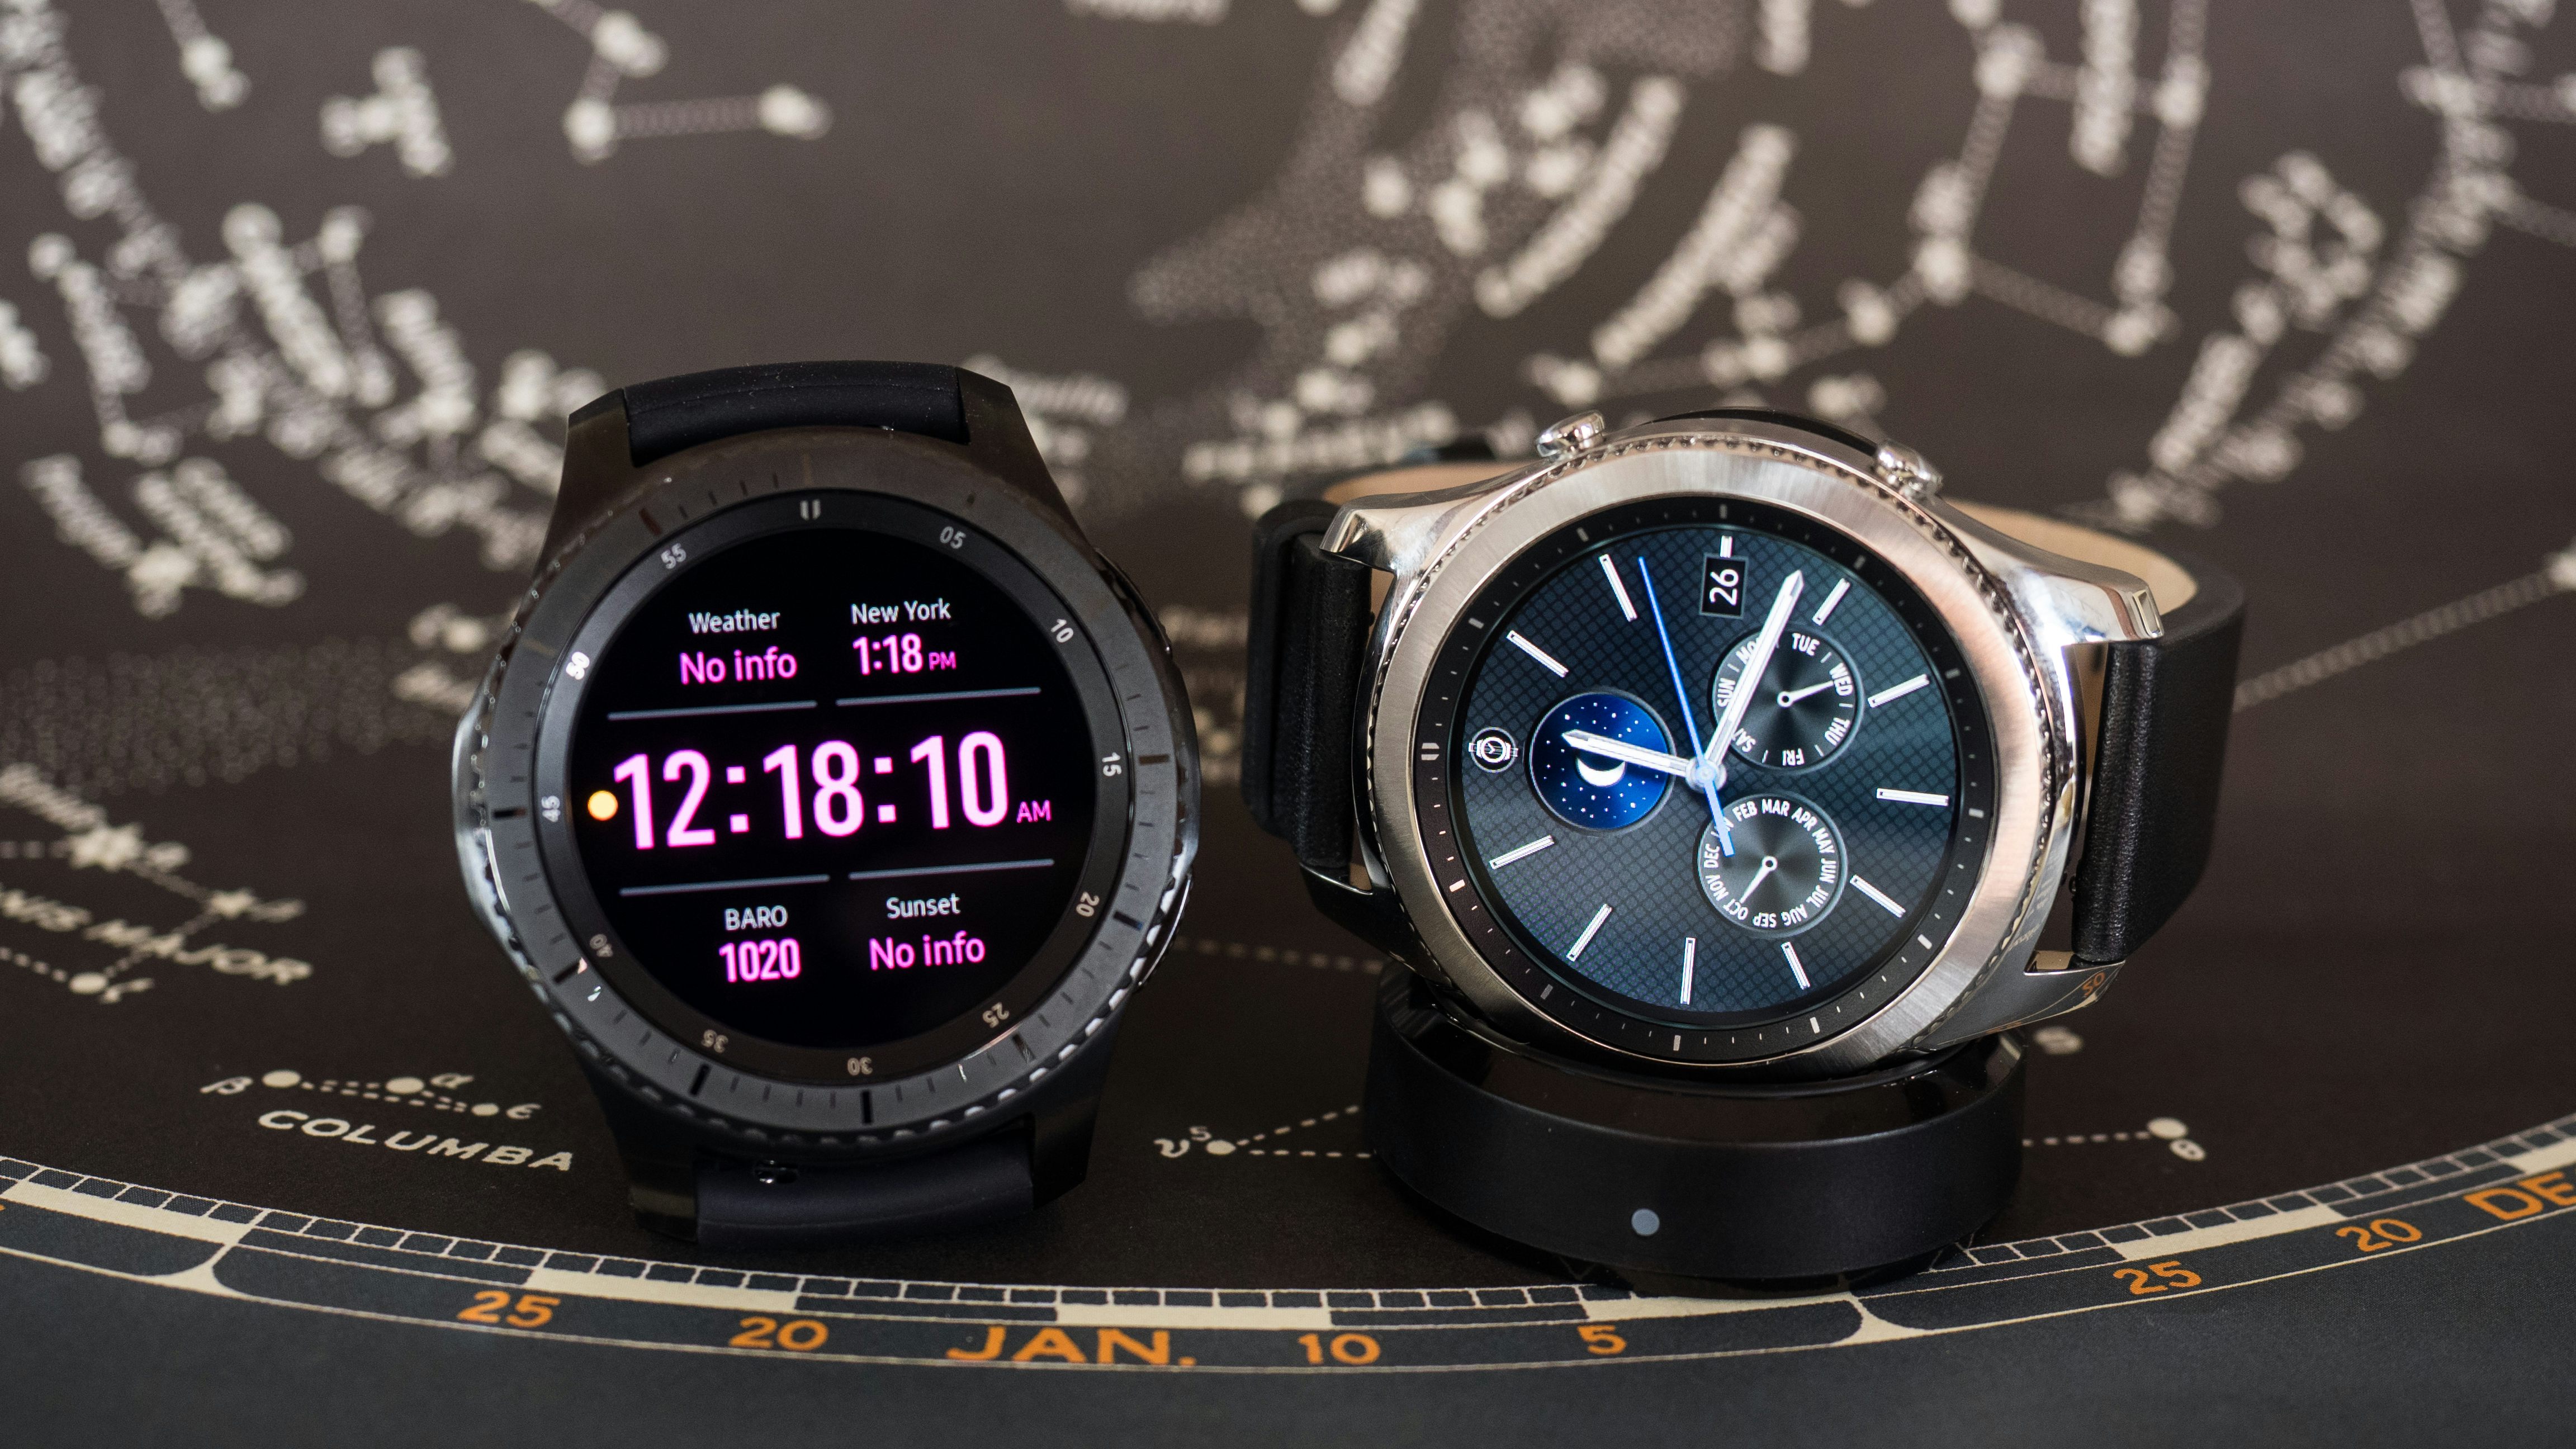 Hands-On: The Samsung Gear S3 Smartwatch Classic And Frontier (Designed By The Guy Who Brought You The Titanic DNA Watch From Romain Jerome) - Hodinkee